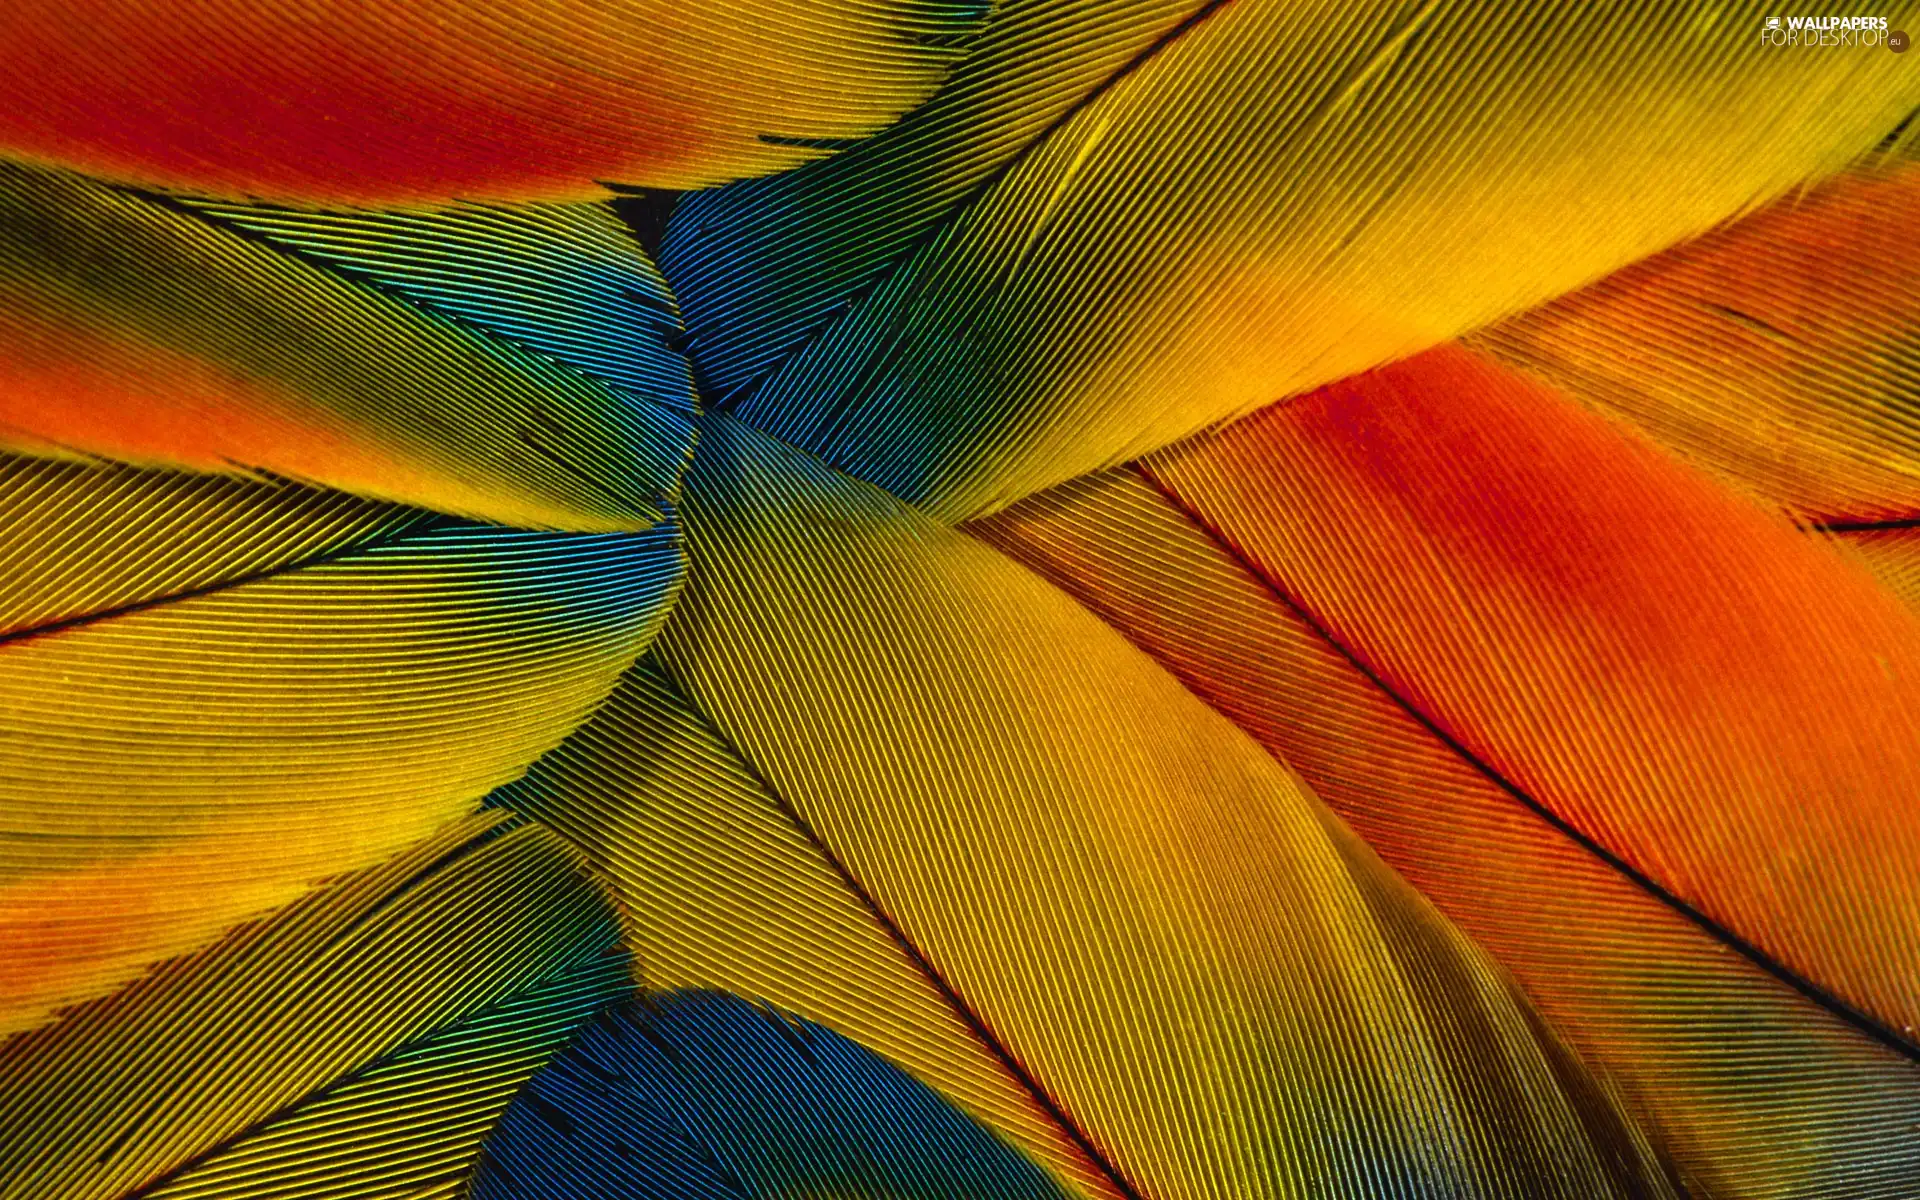 color, feather